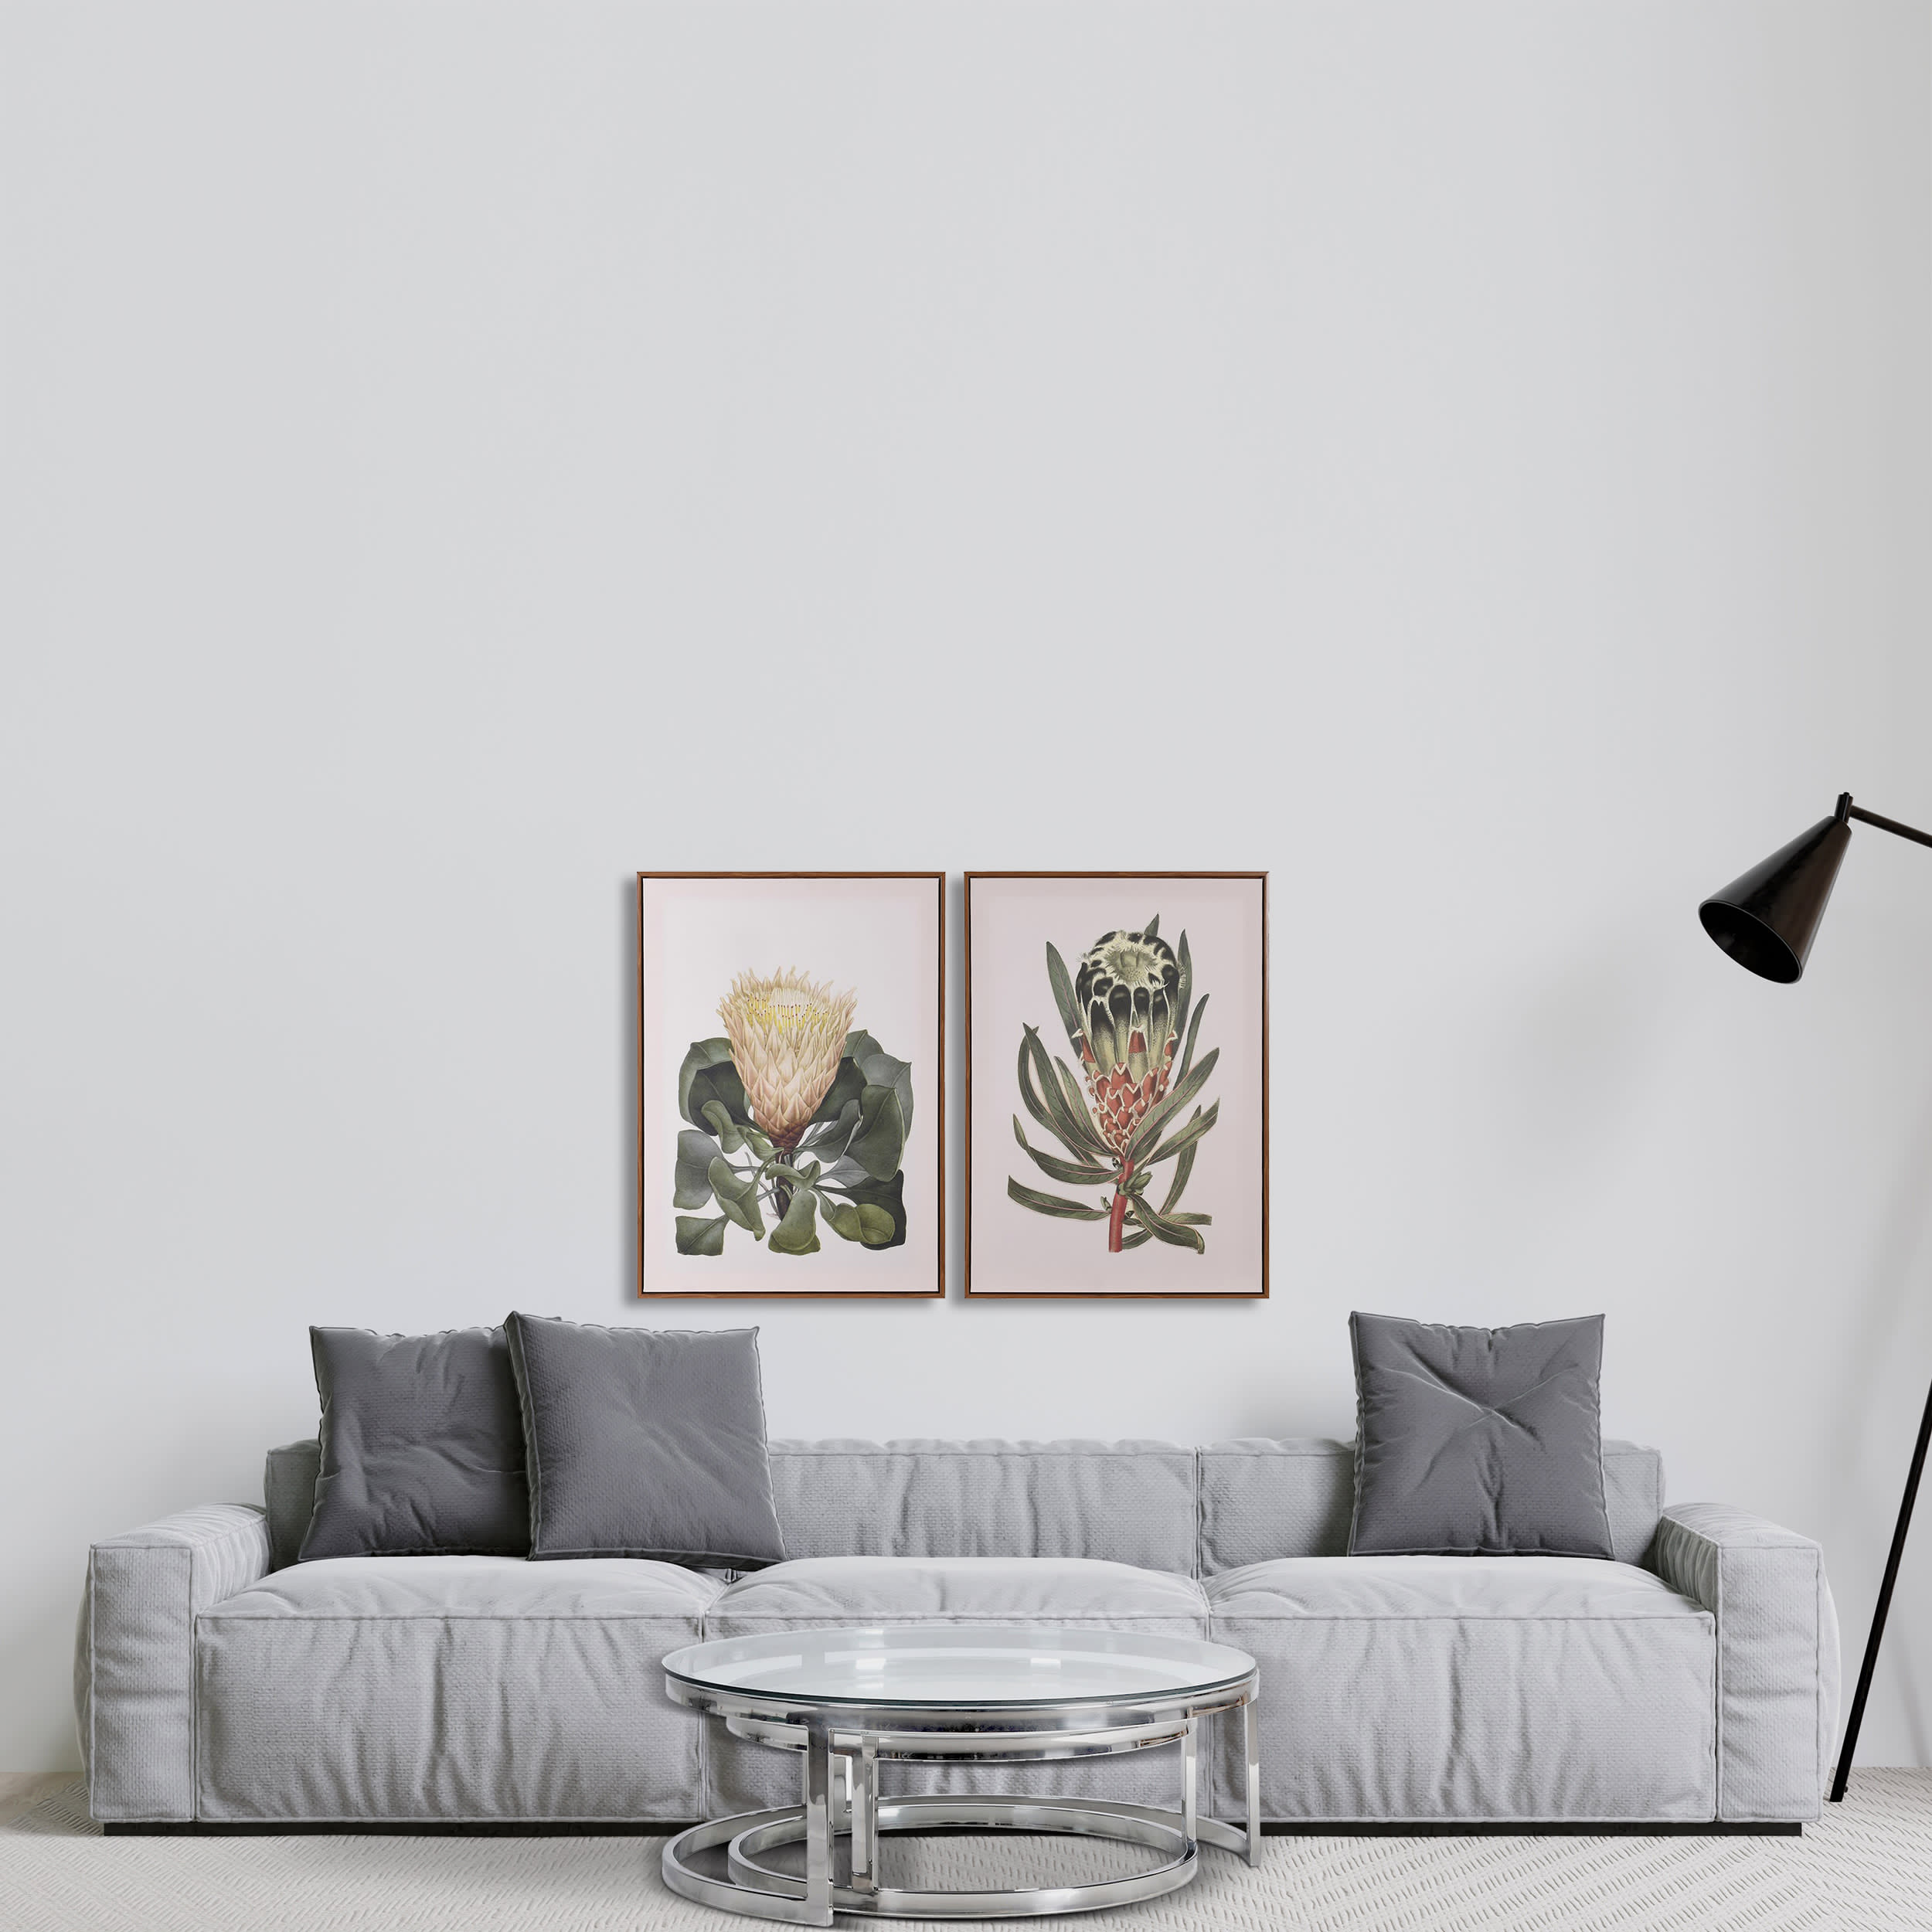 Set of 2 Protea Wall Pictures